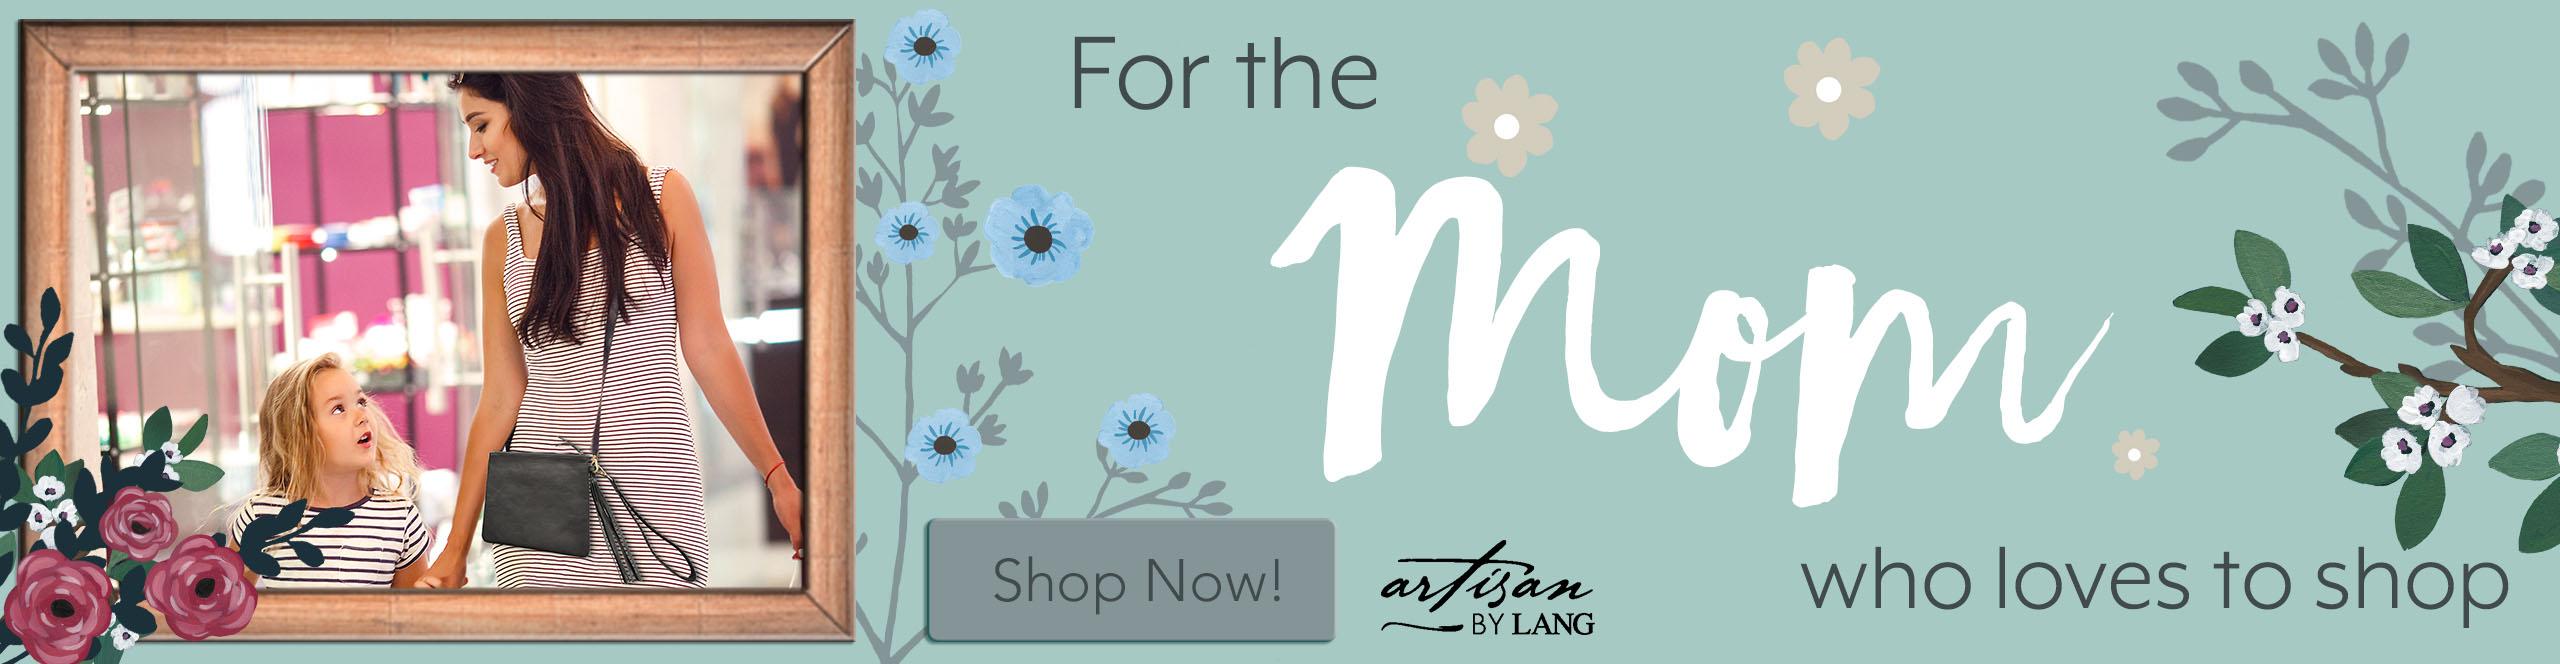 Get 15% Off and FREE SHIPPING on orders $50 or more! Use Code LOVEMOM